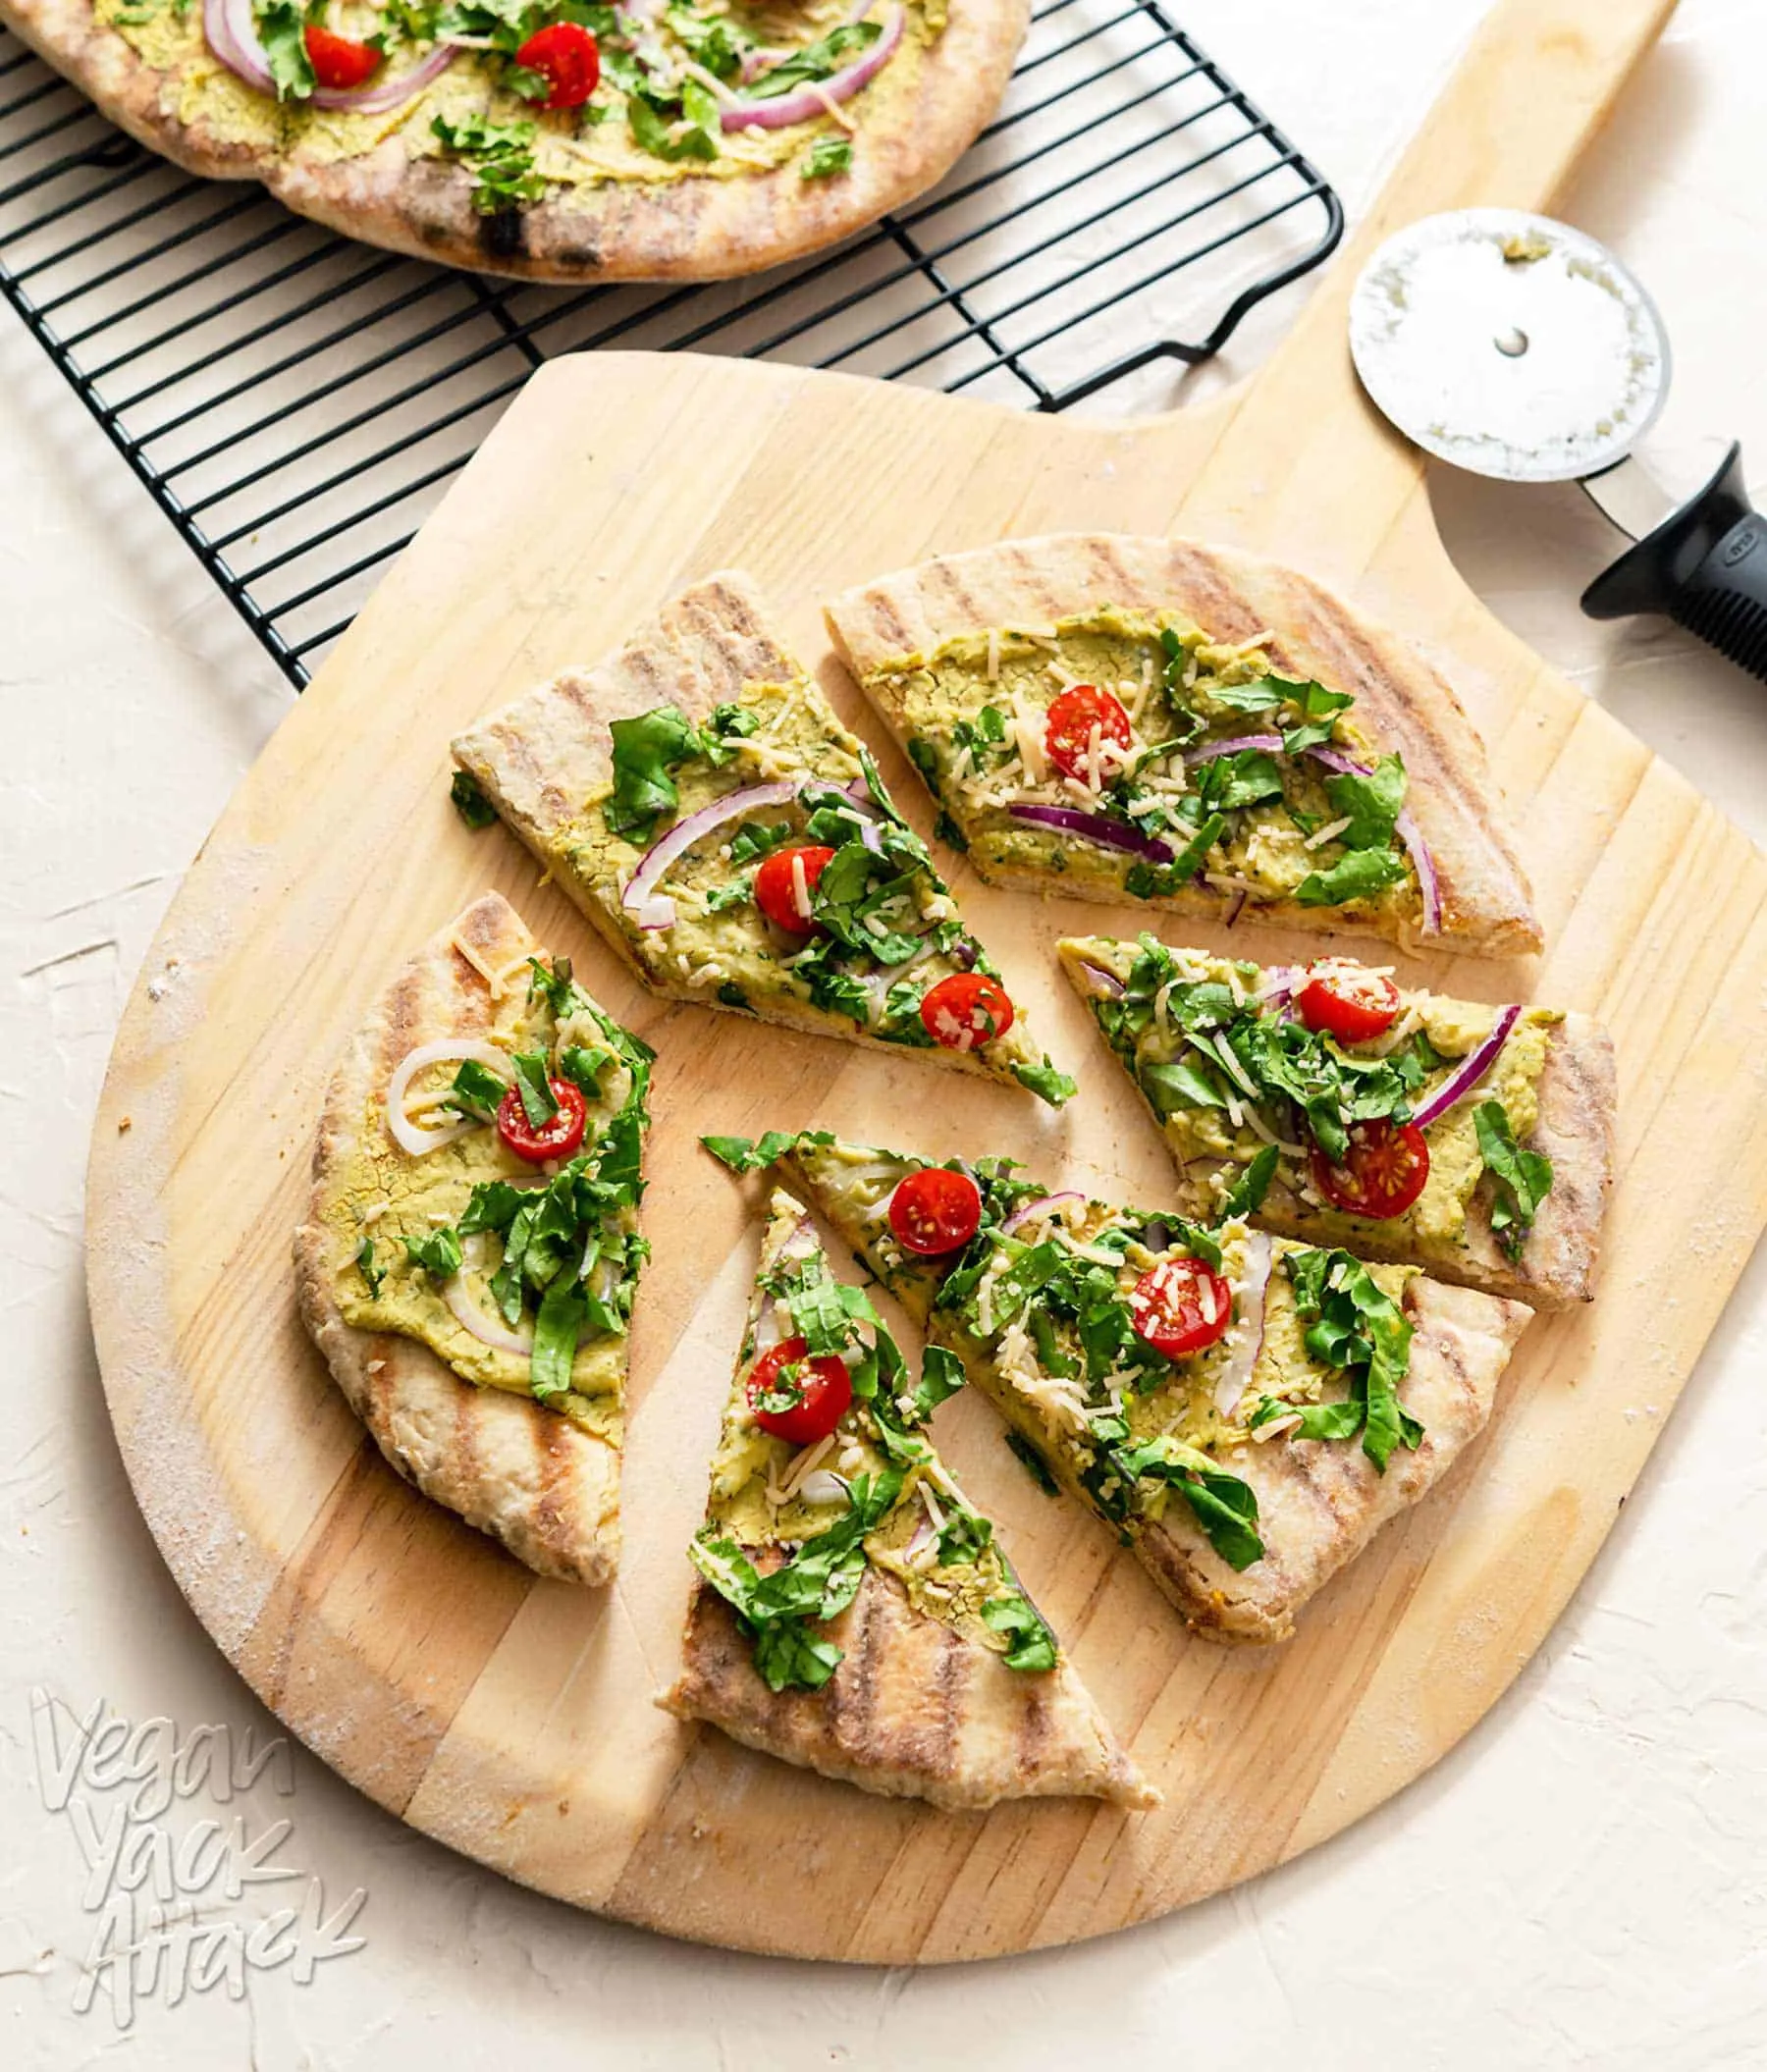 Grilled Sourdough Flatbread cut into slices on a wooden pizza peel